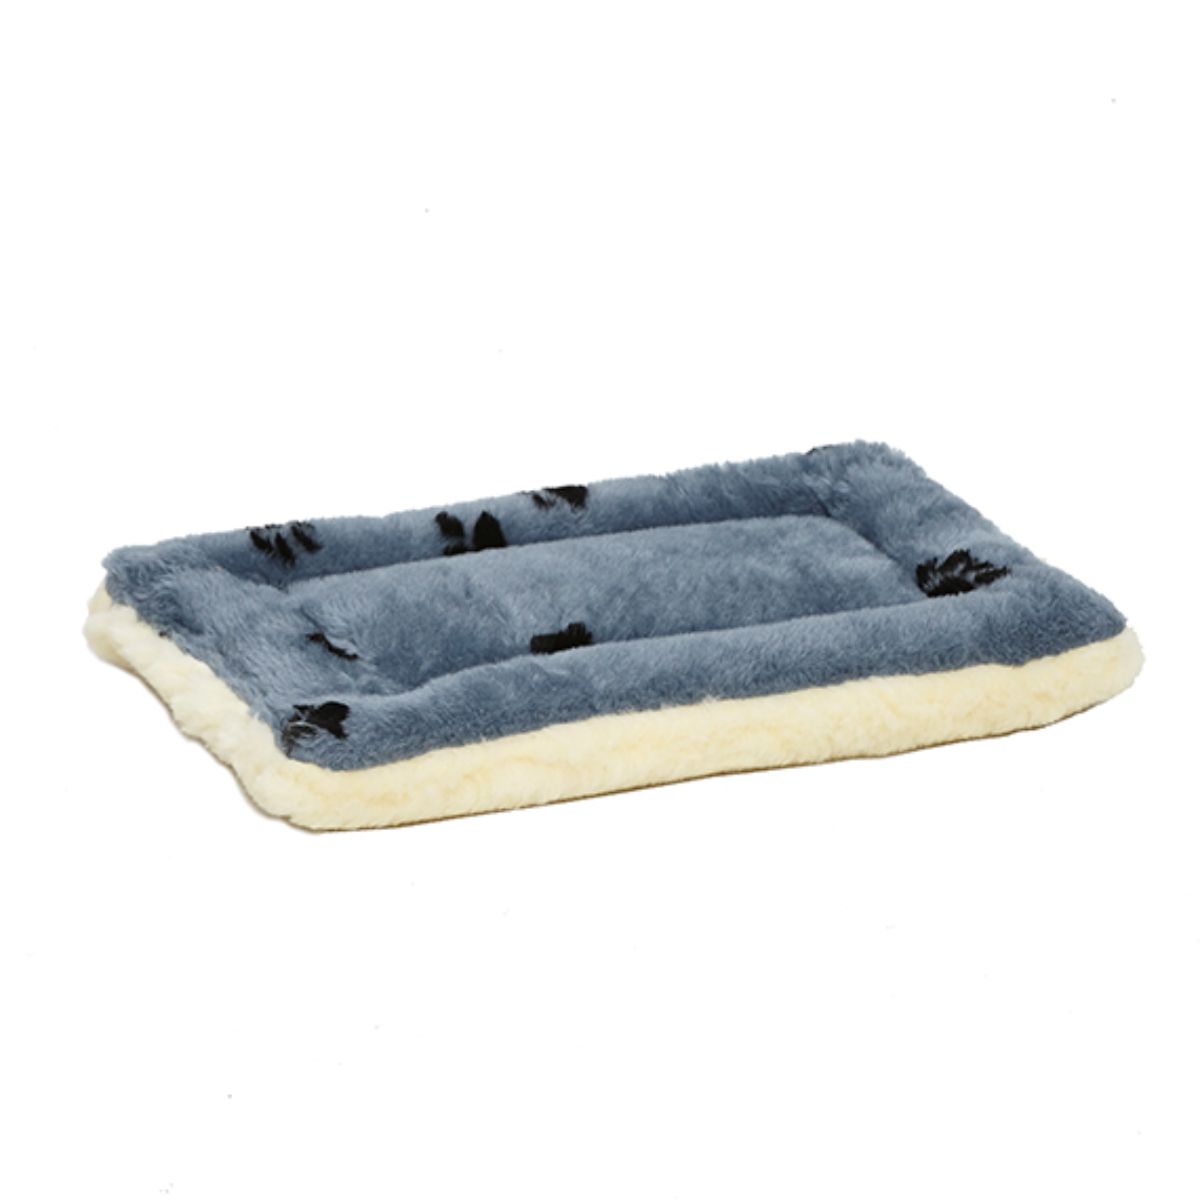 Midwest Pet Products Quiet Time Reversible Fleece Paw Print Dog Mat